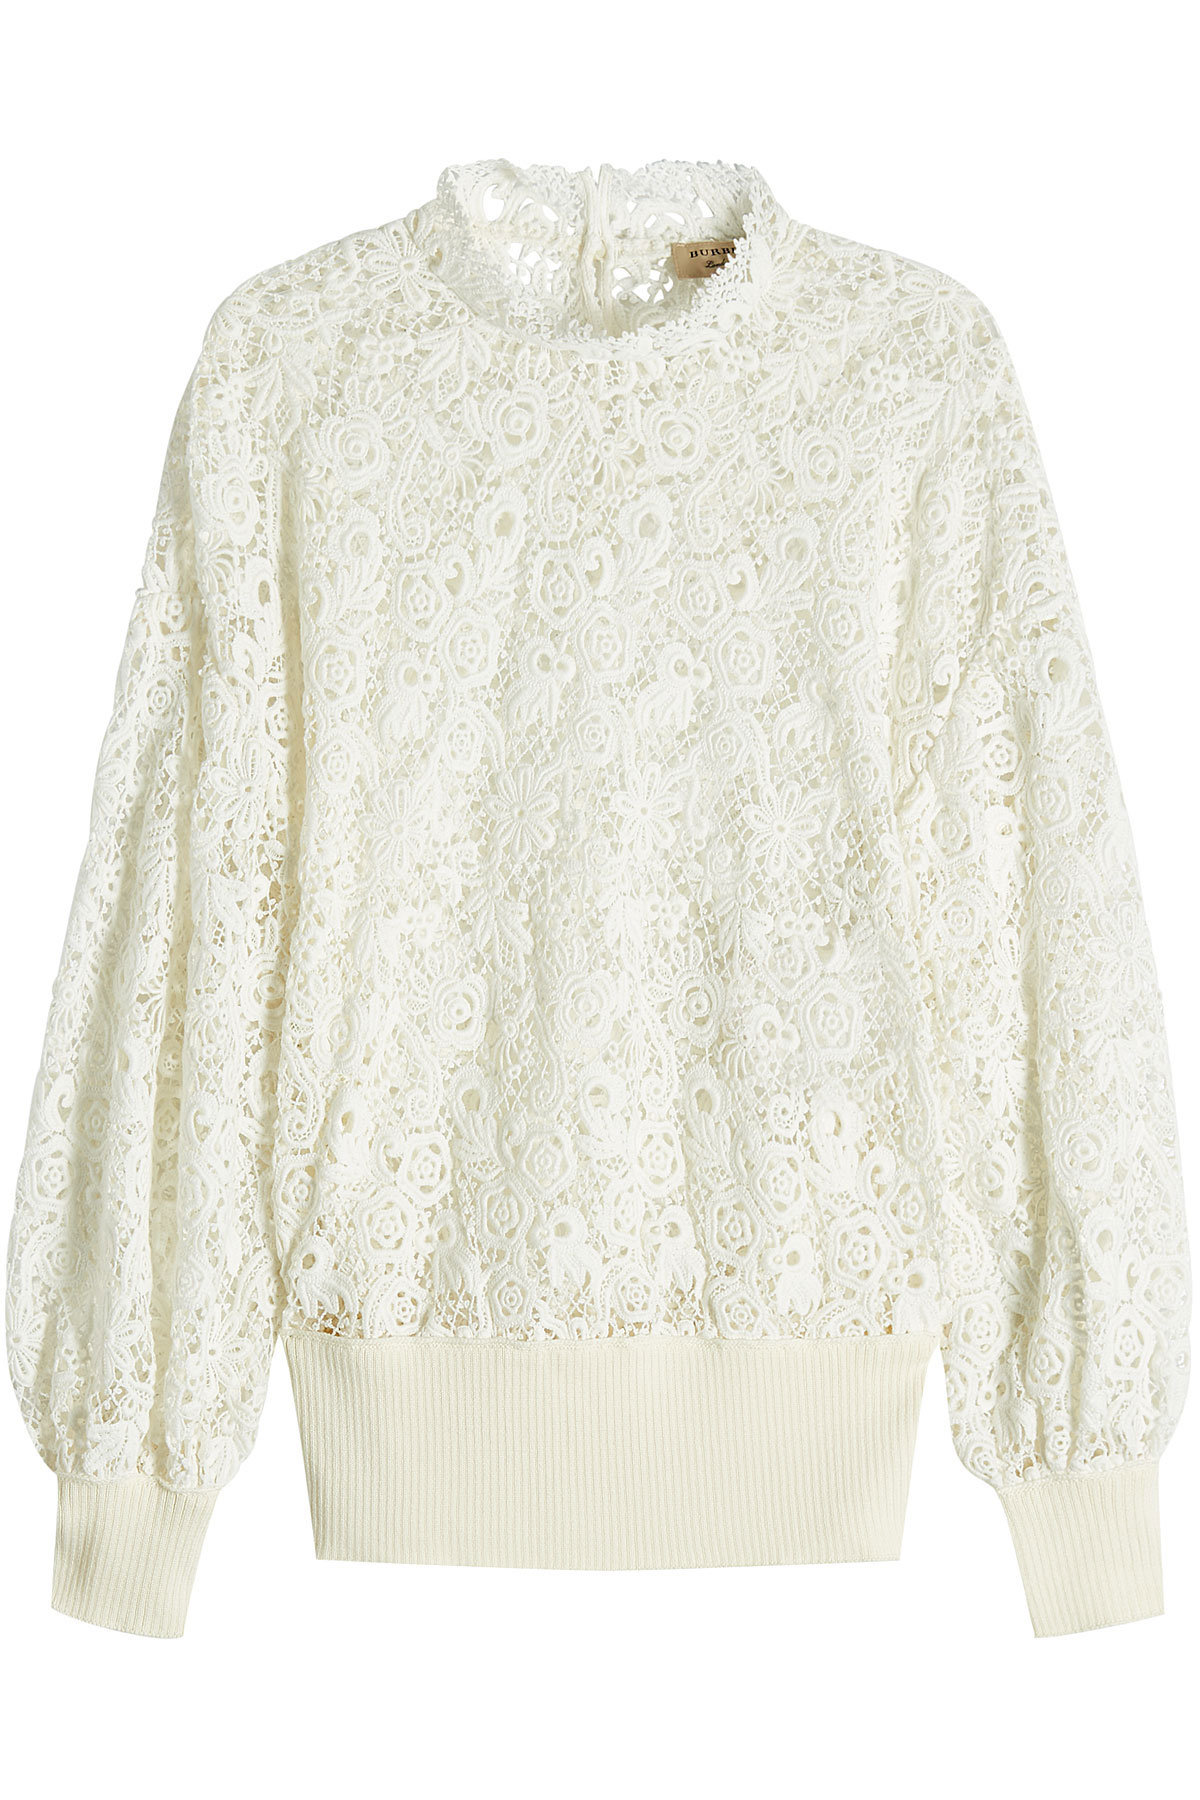 Burberry - Lace Pullover with Cotton